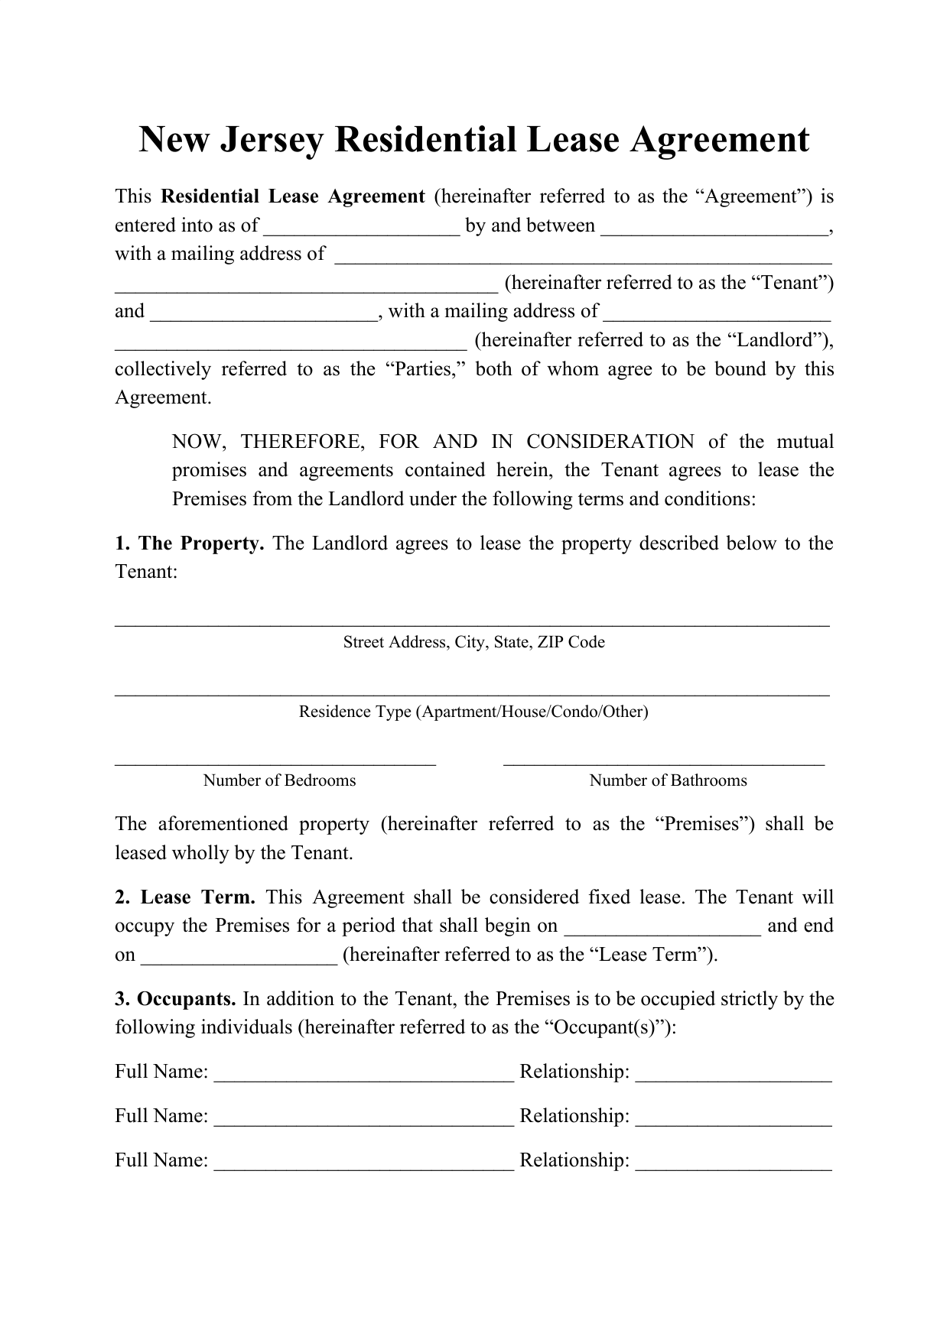 New Jersey Residential Lease Agreement Template Download Printable In new jersey residential lease agreement template